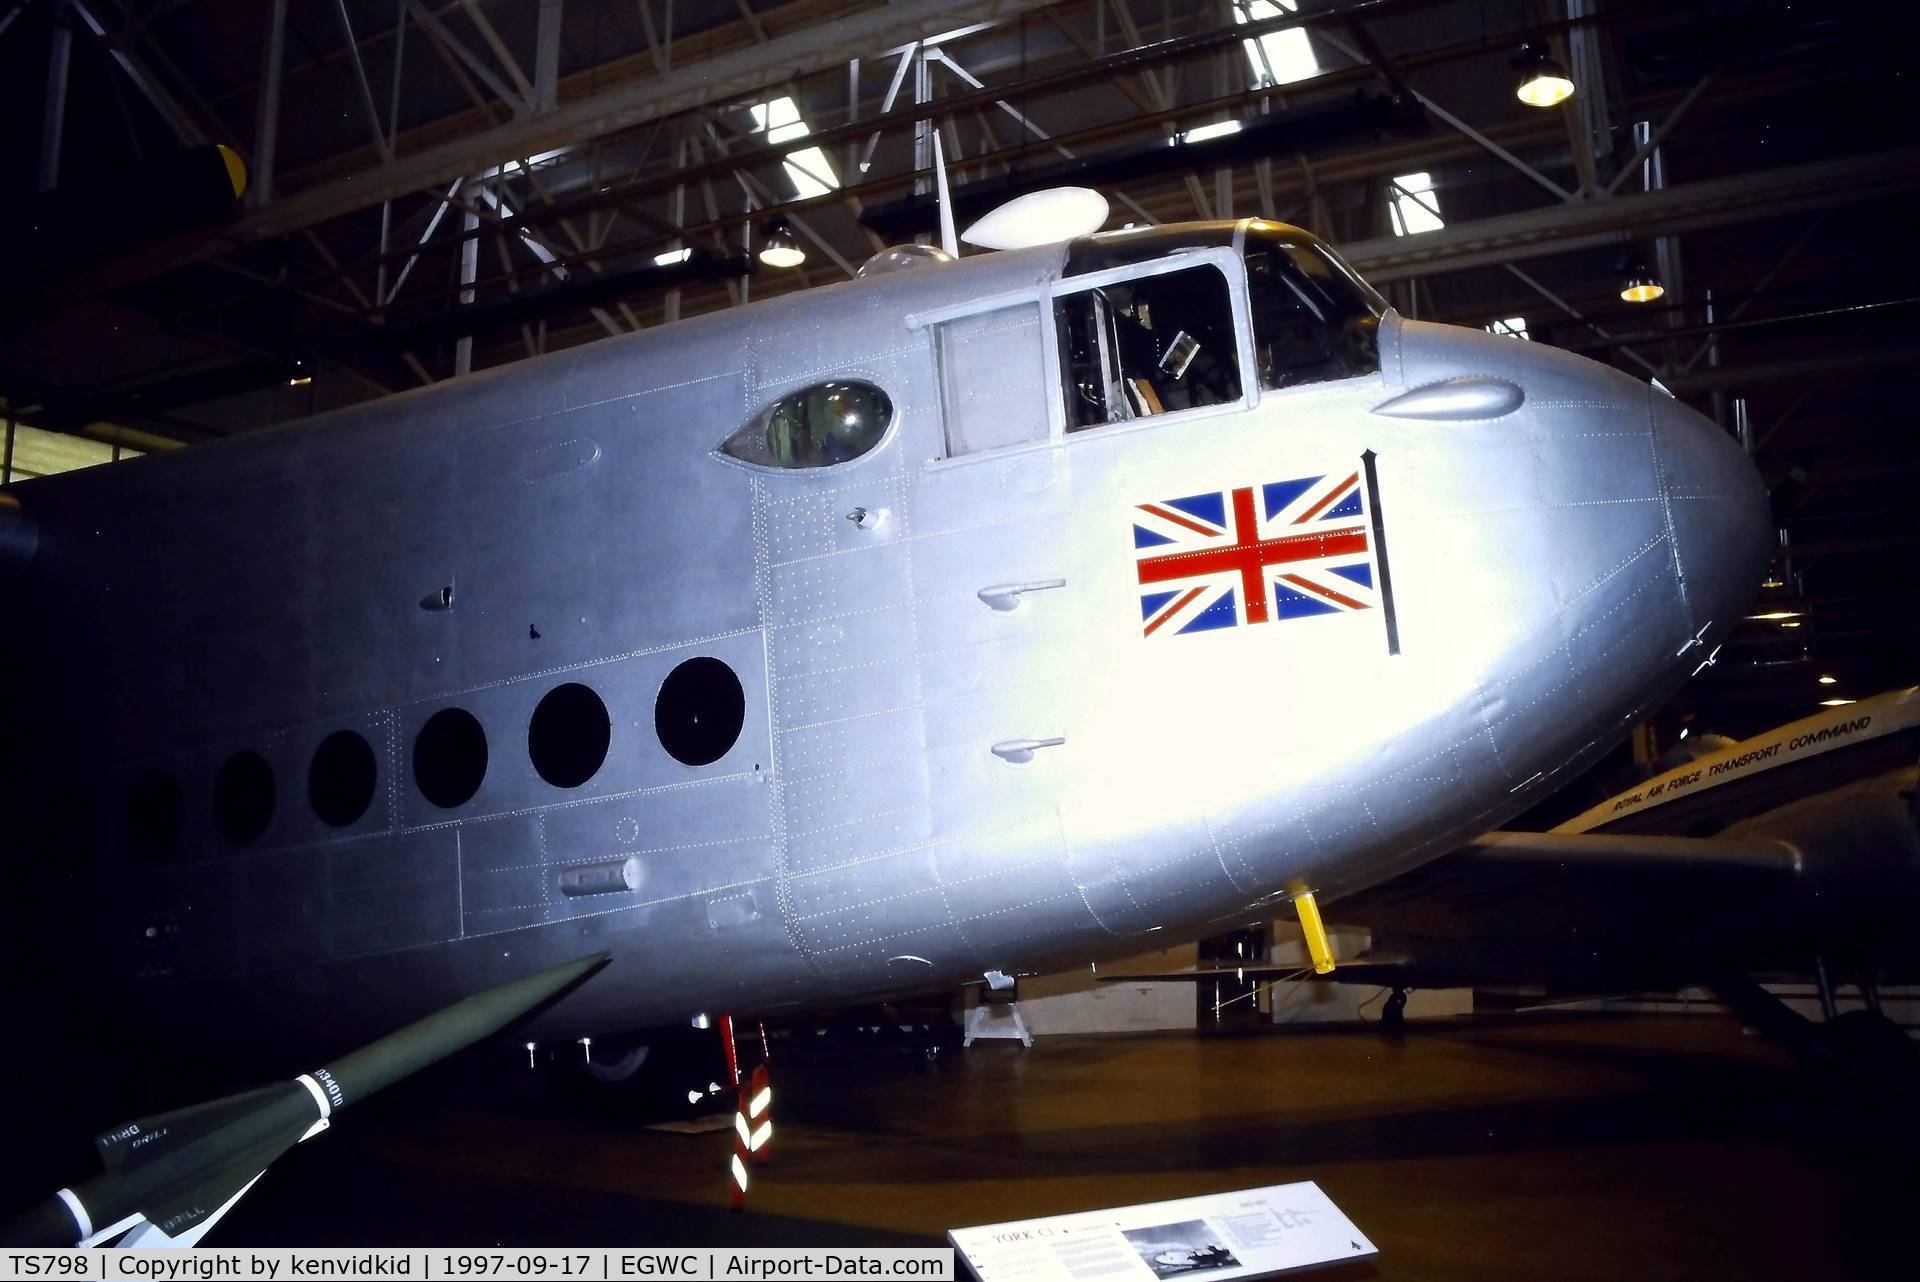 TS798, Avro 685 York C.1 C/N 1223, A visit to Cosford in 1997.